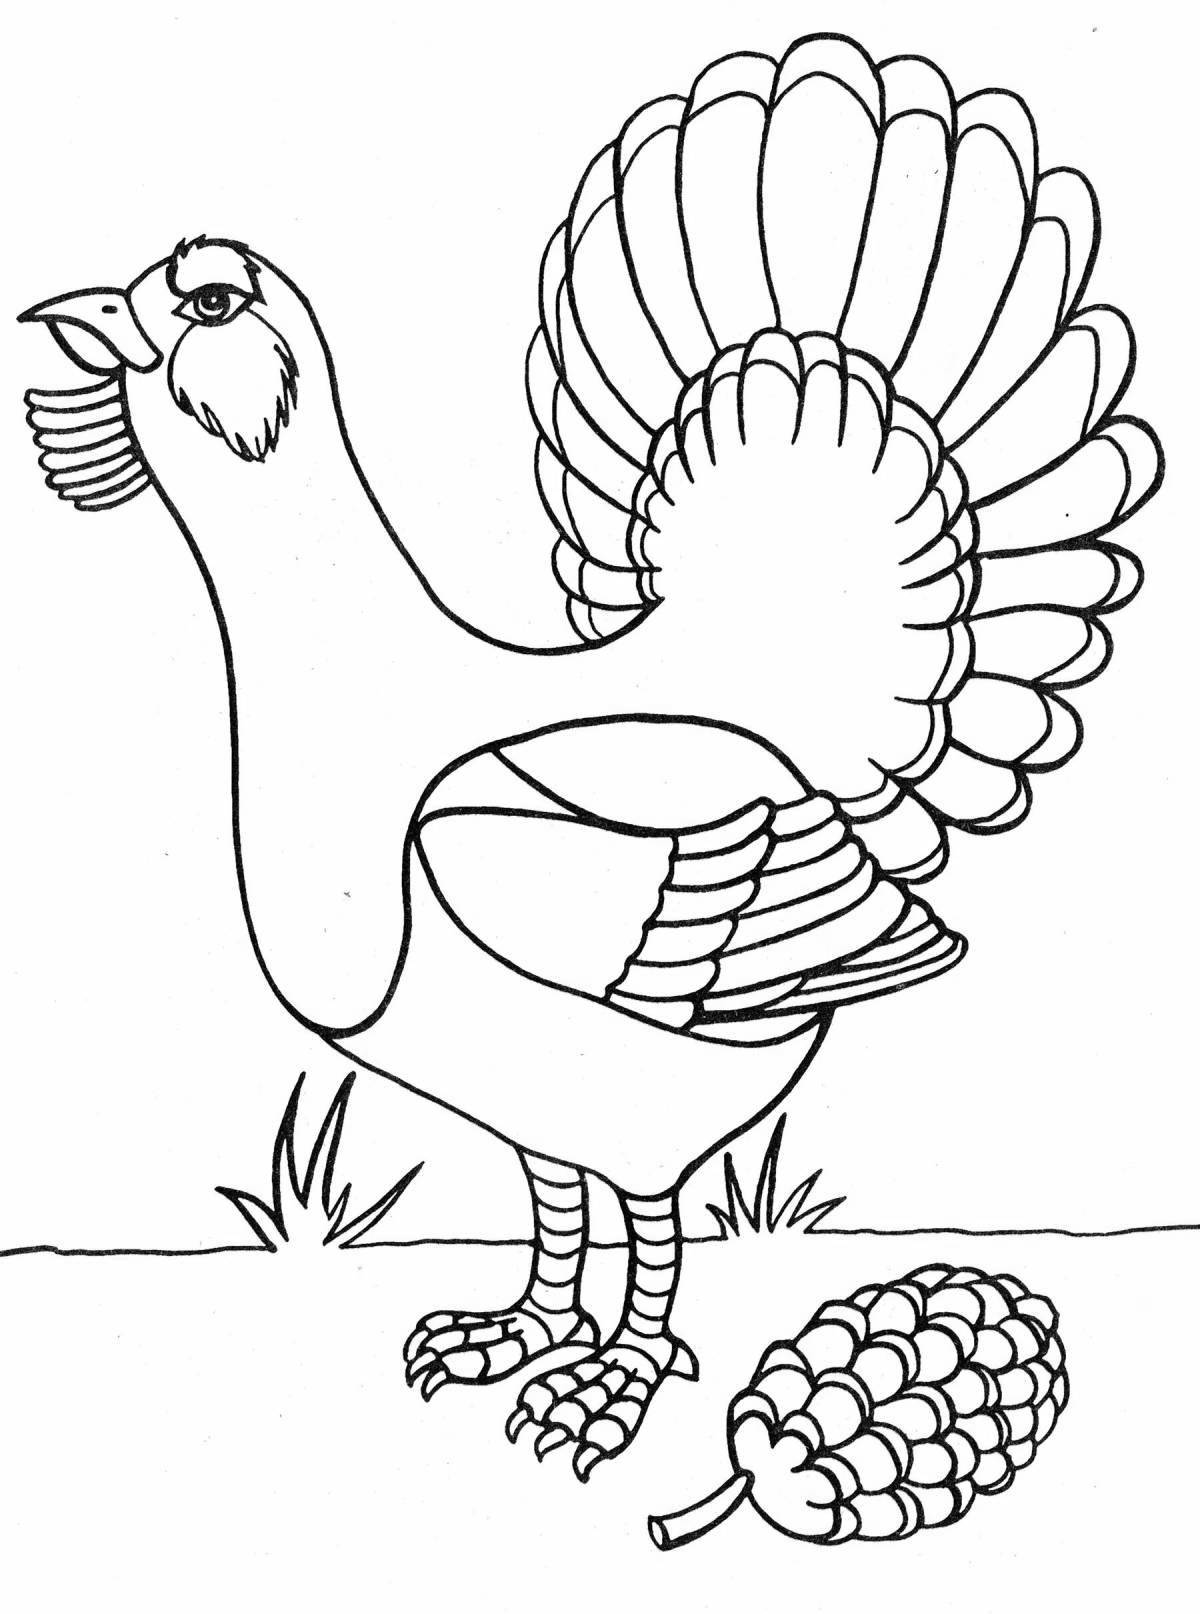 Attractive black grouse coloring pages for kids